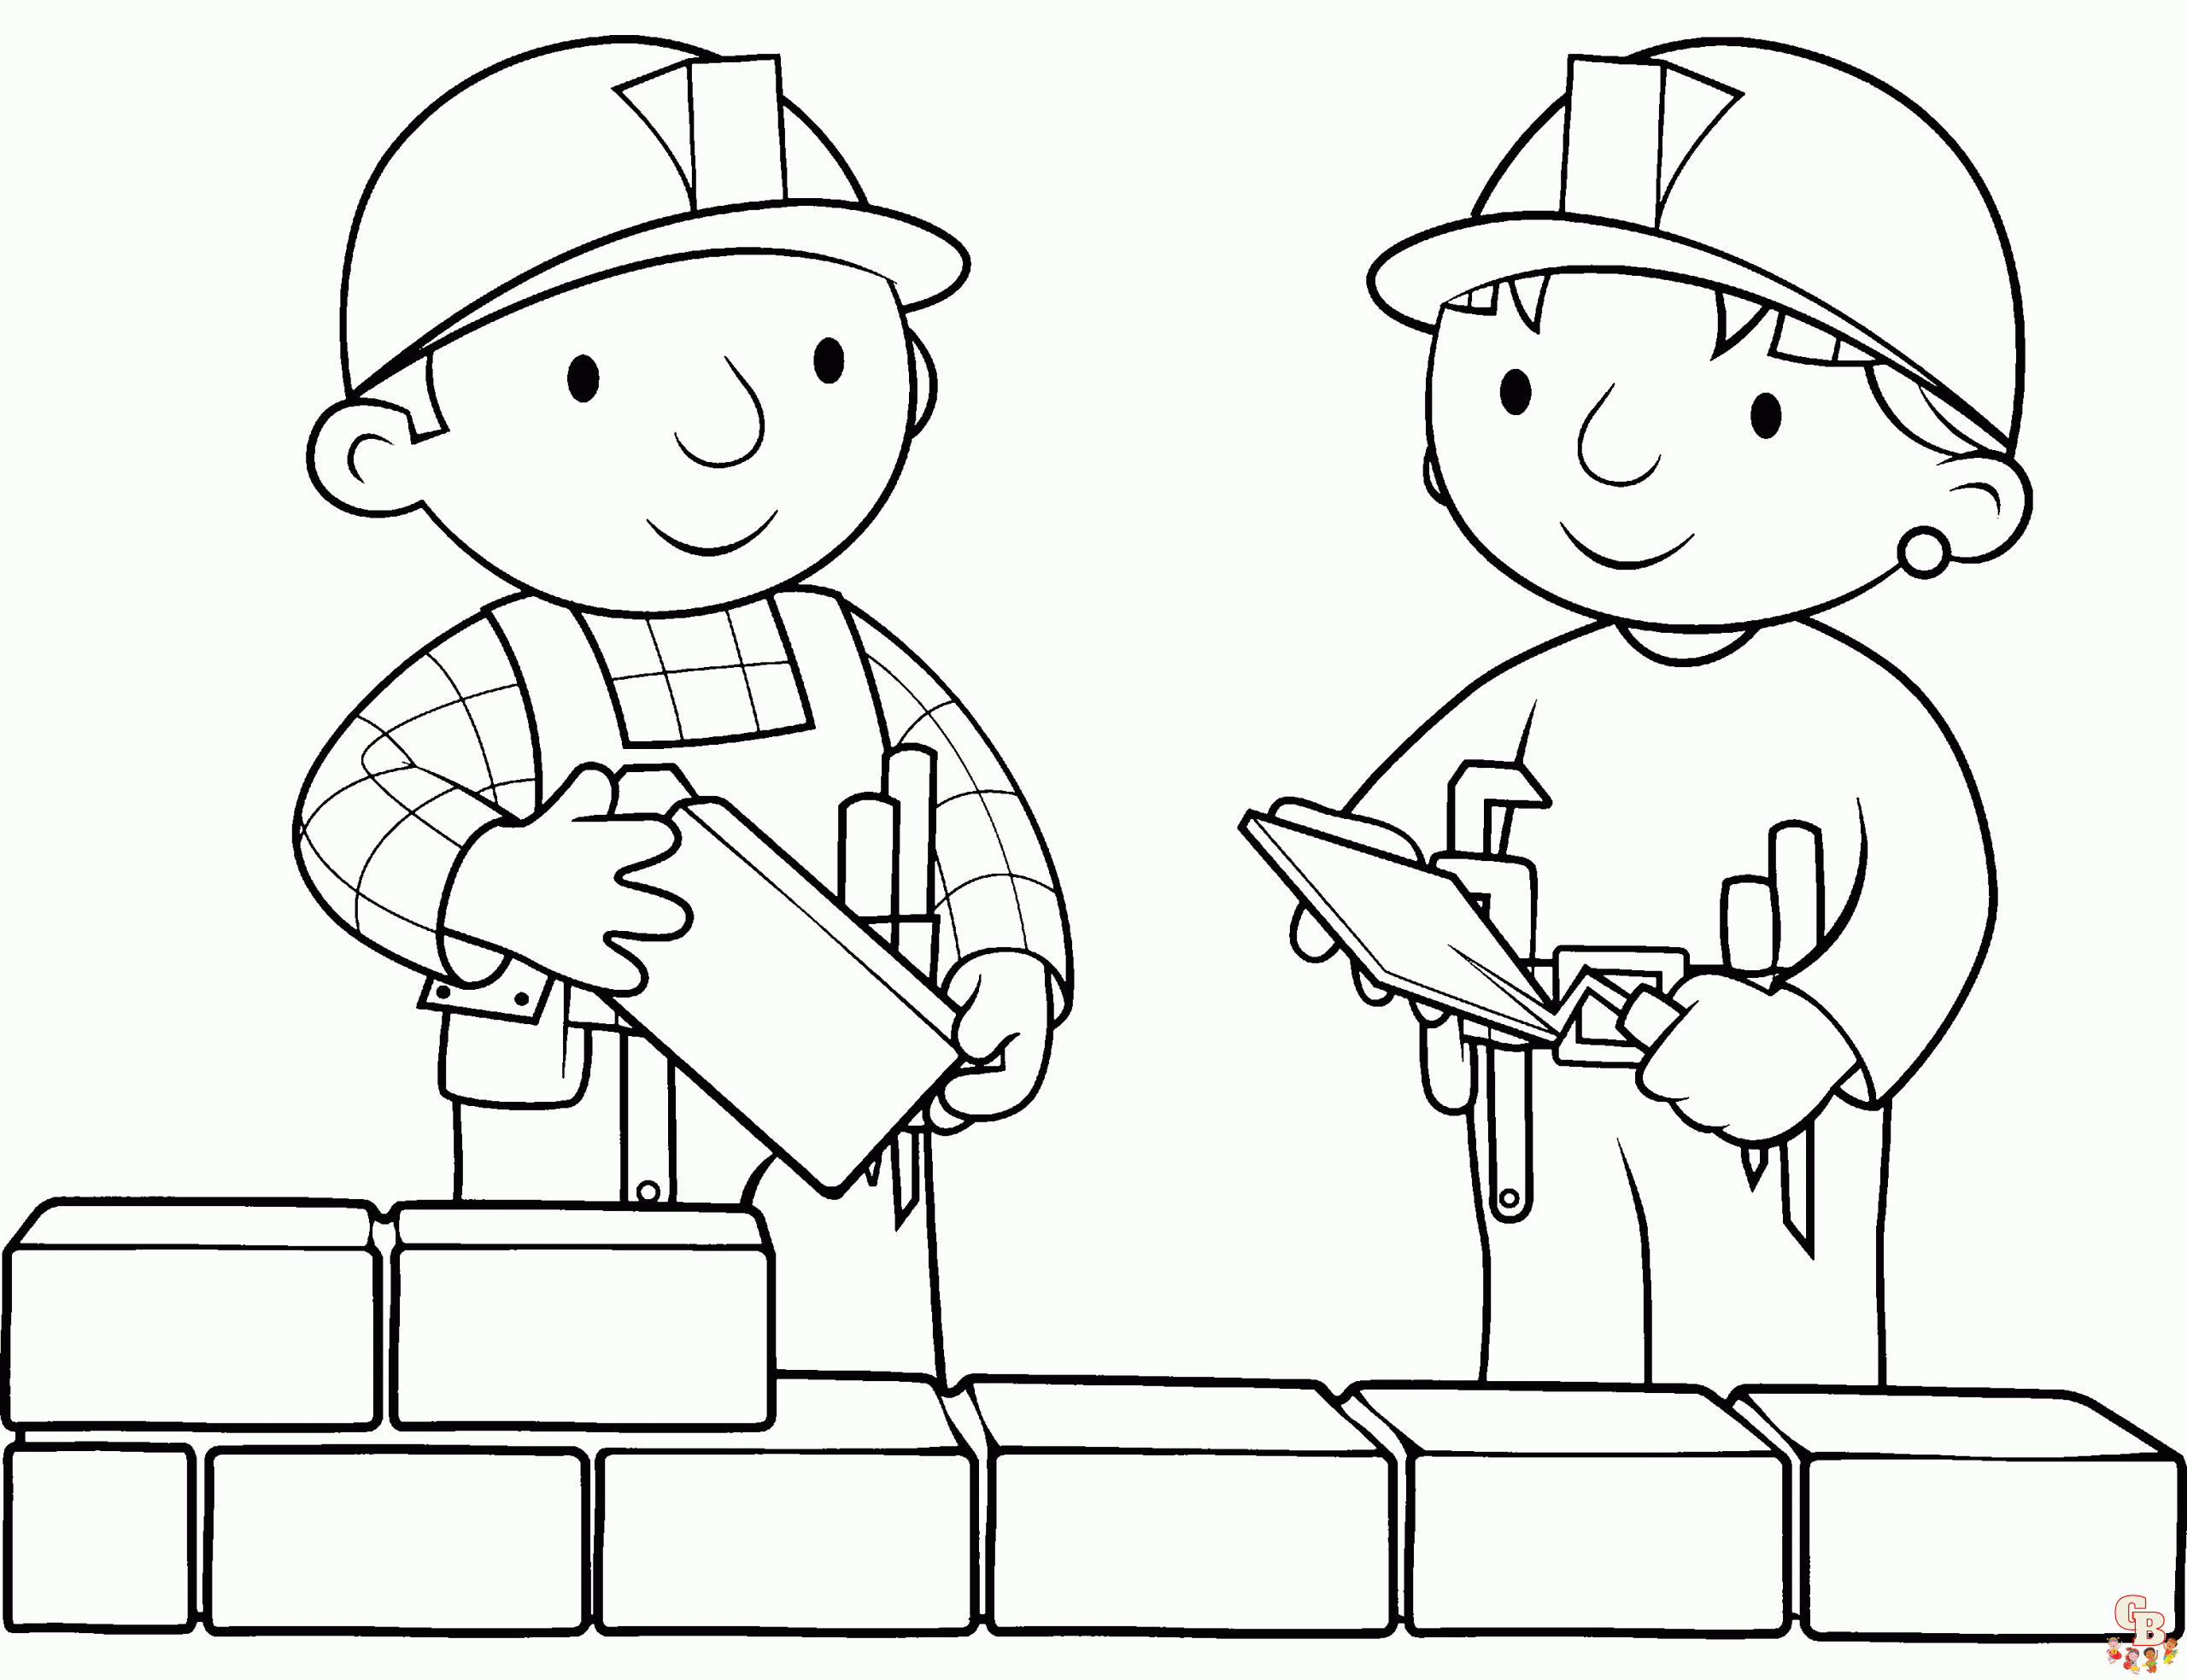 Bob the Builder Coloring Pages 6